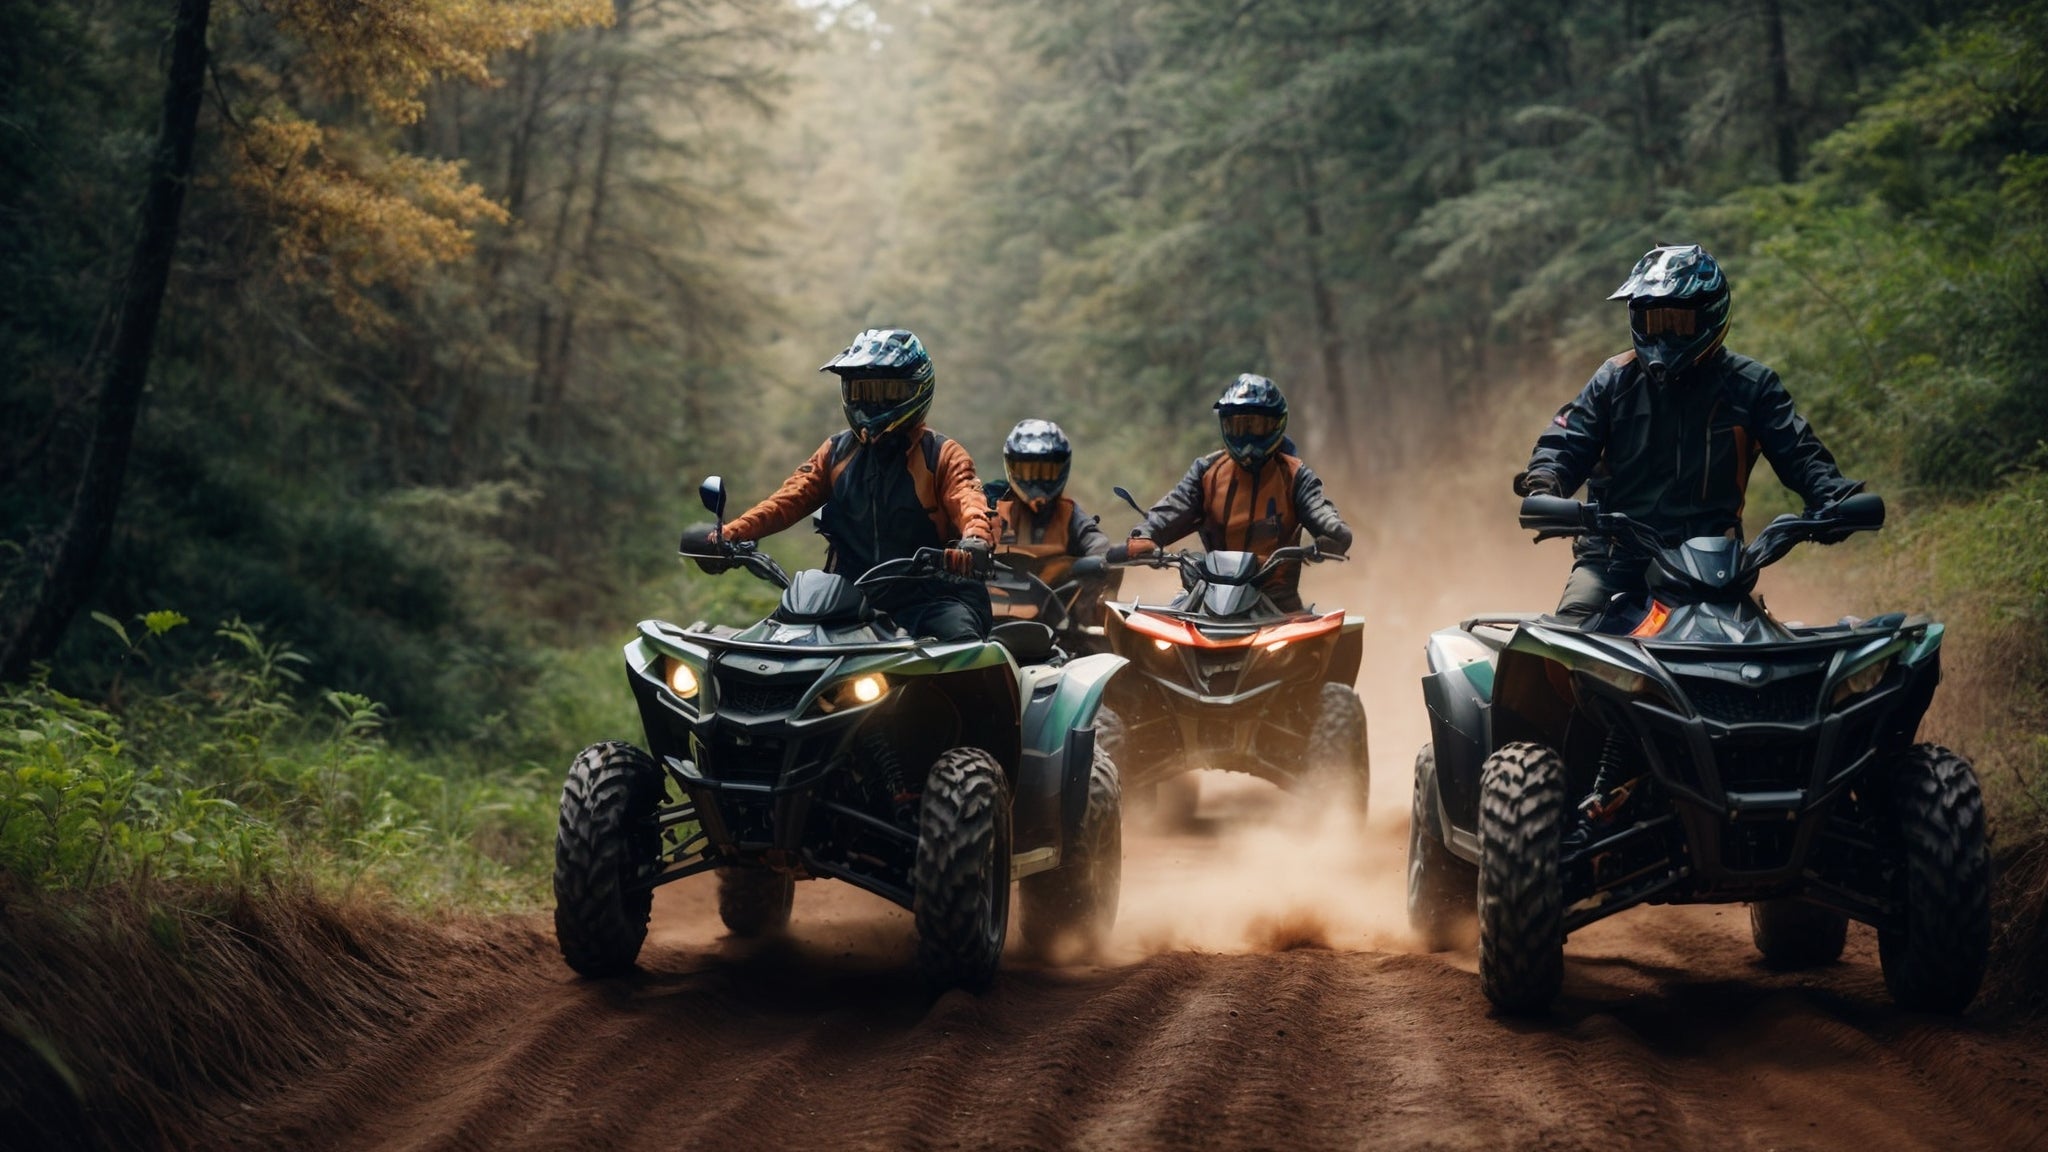 The best place to order ATVs from Online - Q9 PowerSports USA